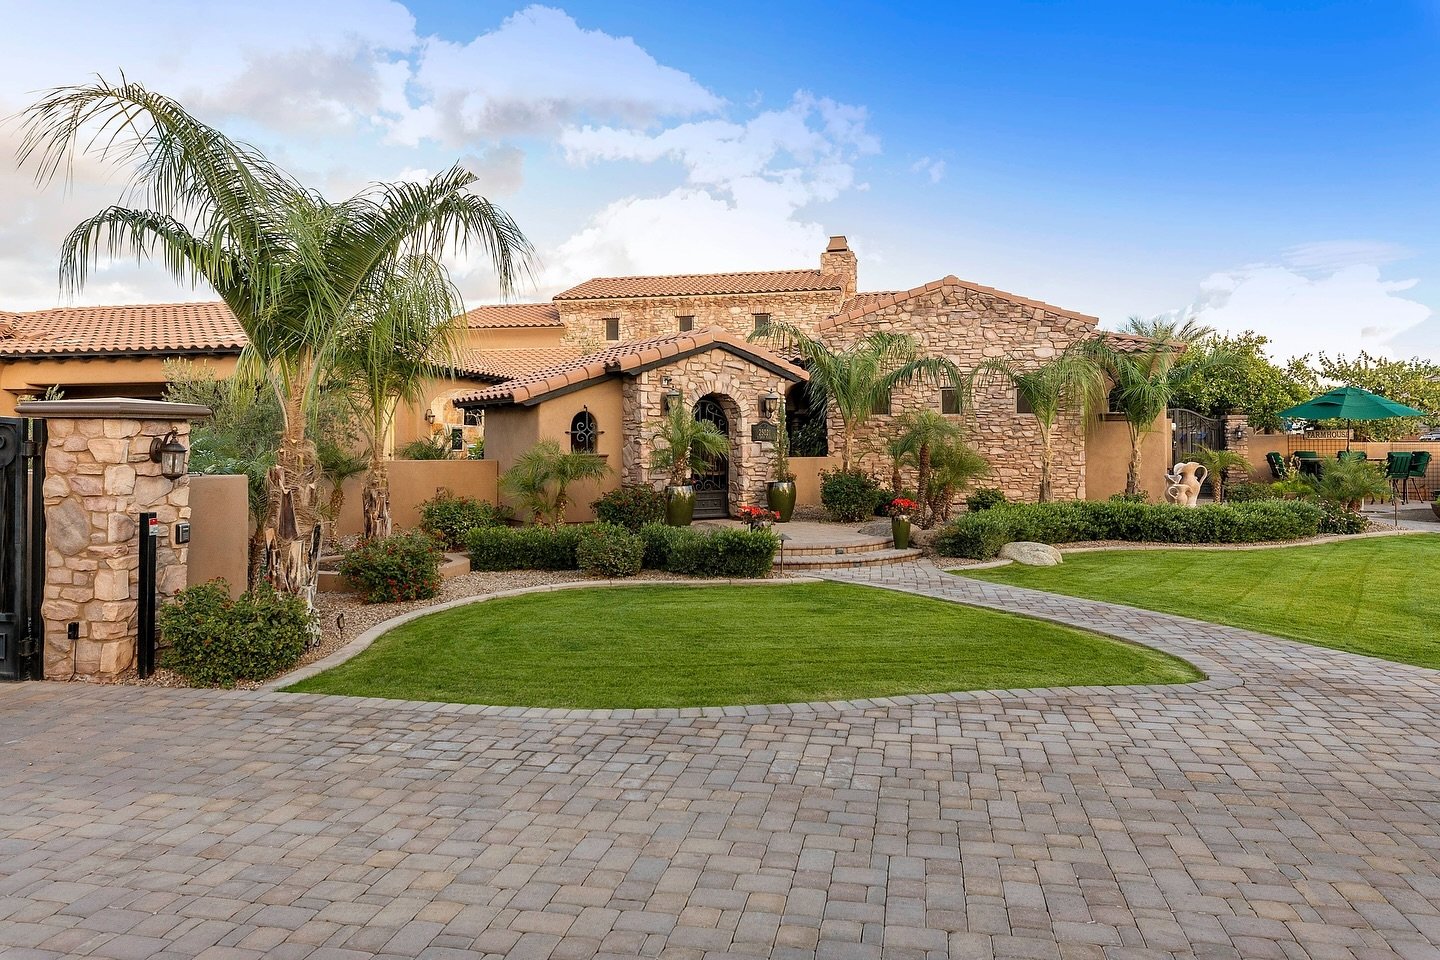 Home sweet home 🏡 

Here at Phoenix Virtual Tour, we create a visually compelling narrative that helps buyers envision the property as their future home. 

✨ Contact us today! ✨
📧 Email: Dave@phoenixvirtualtour.com
📞Phone: 602-647-8887
🌐 Website: